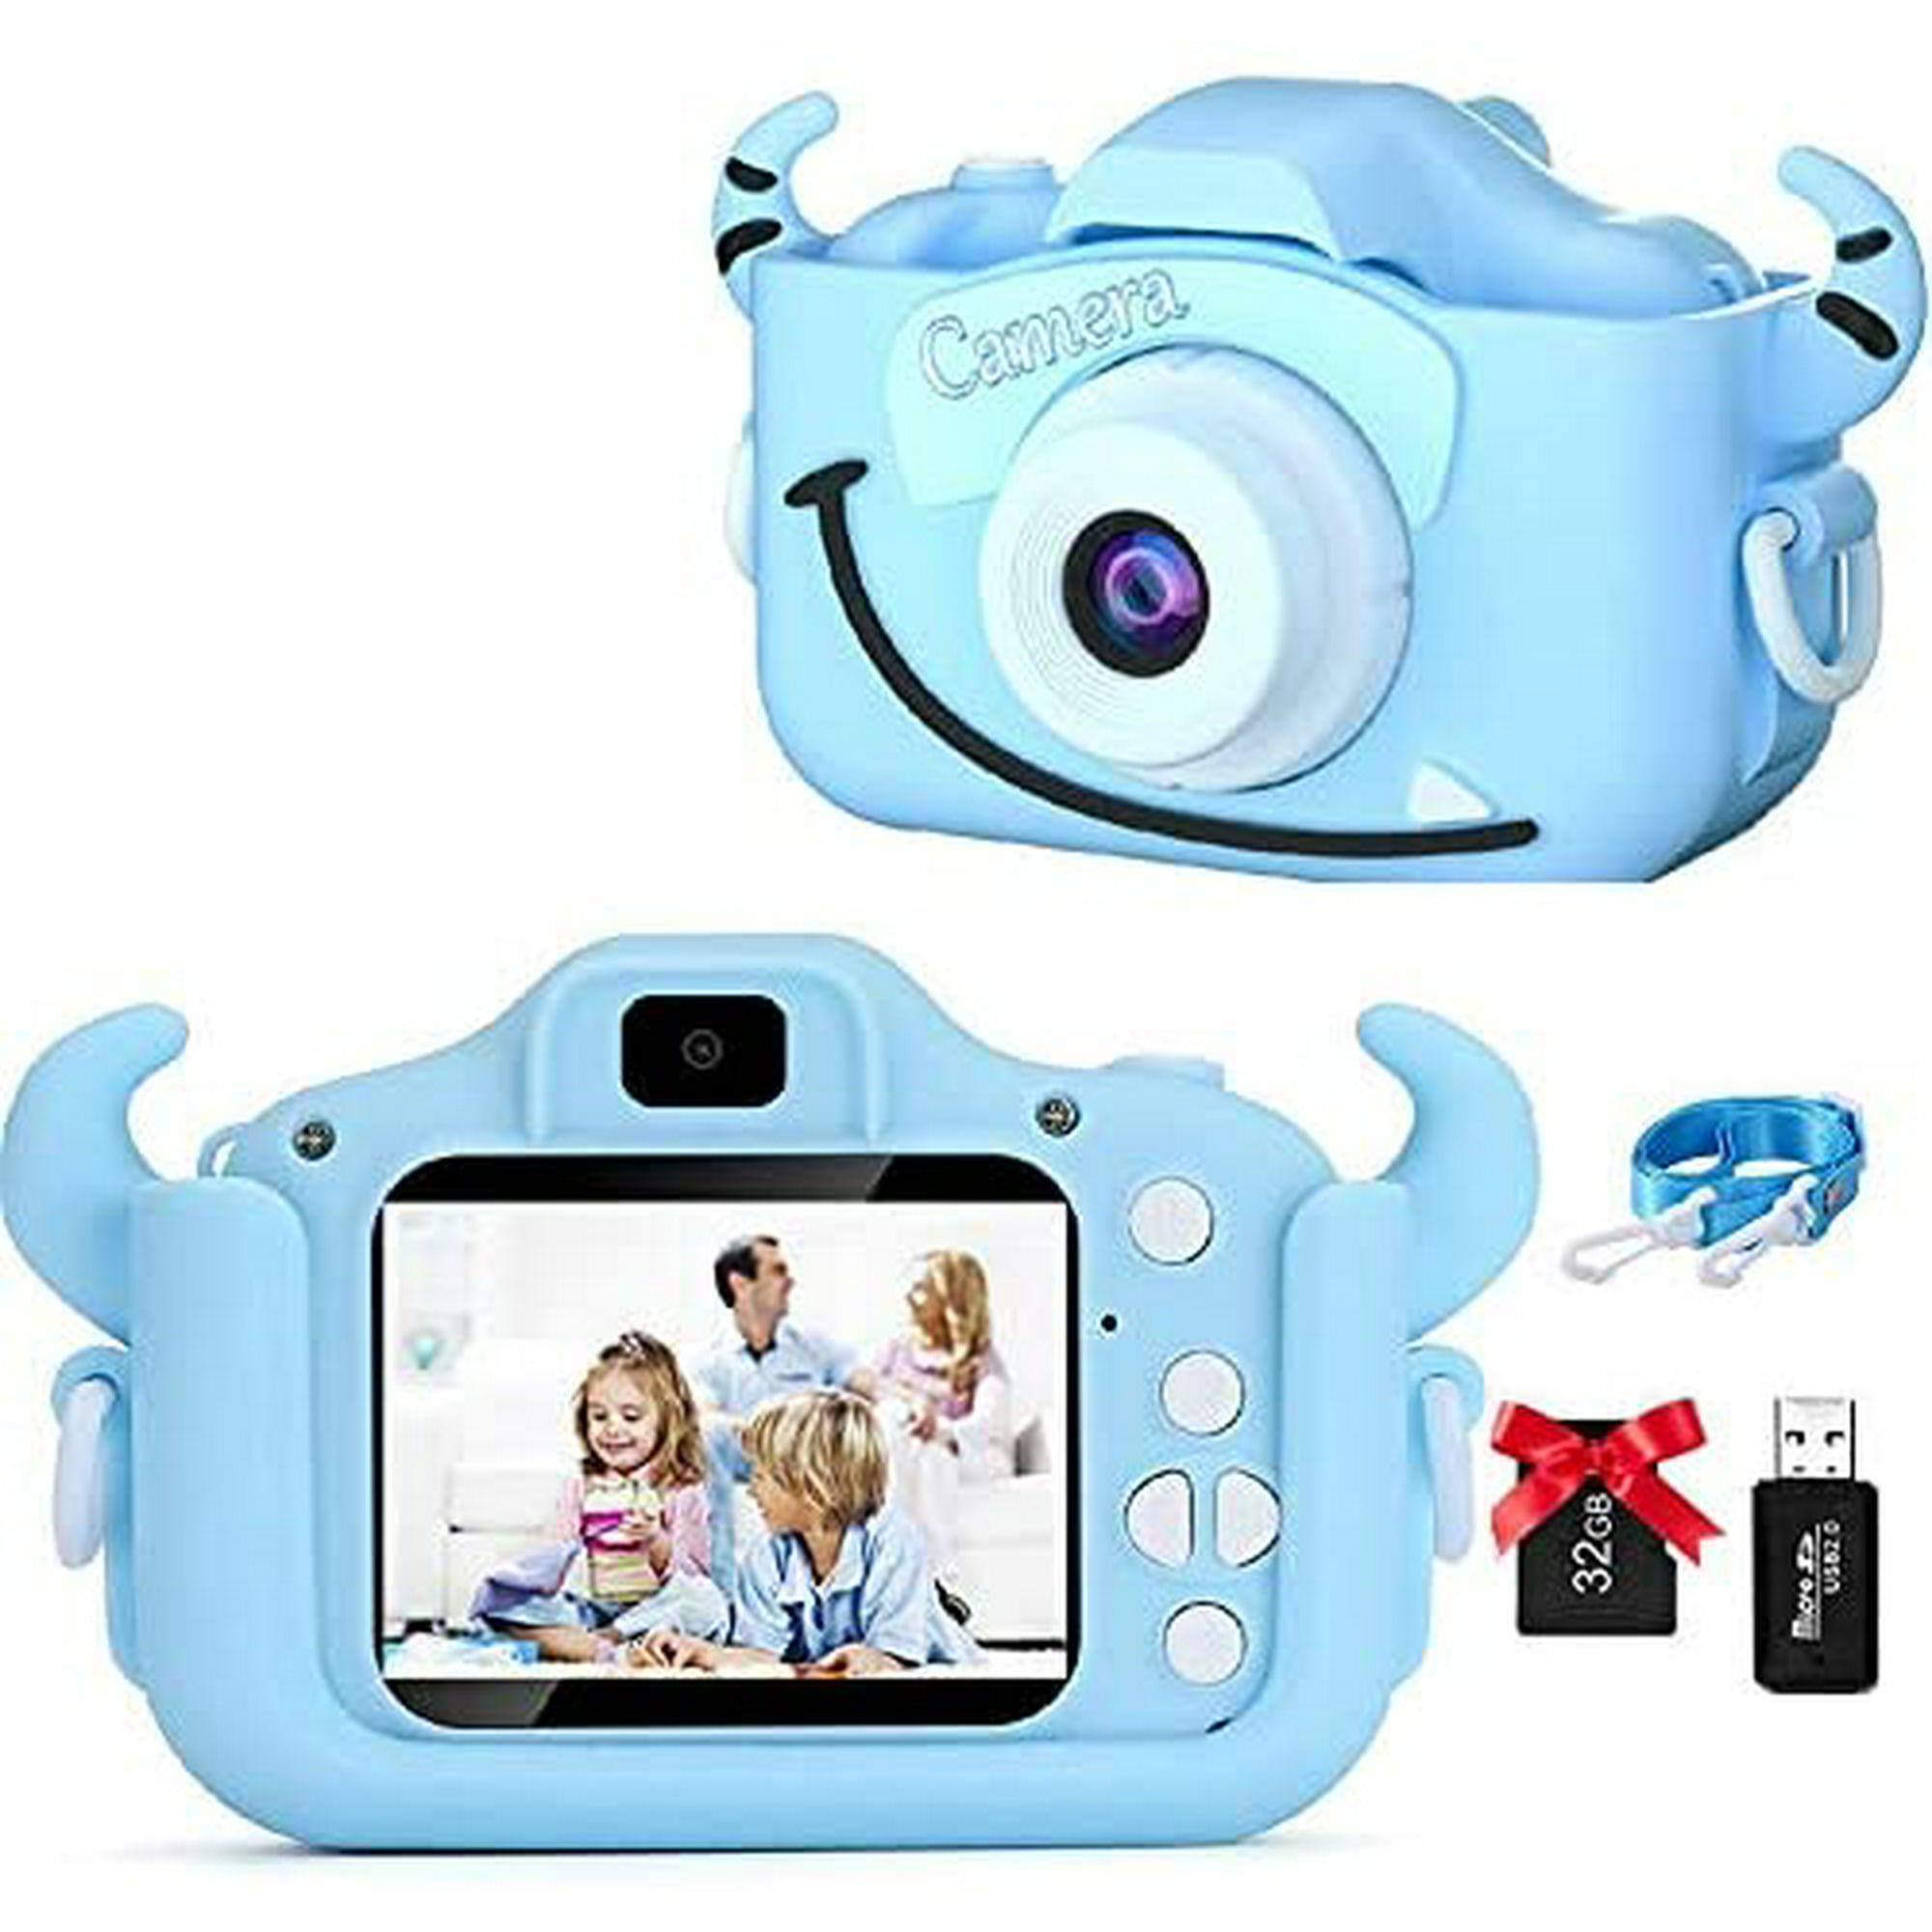 Kidz Kids Camera for Boys Blue Selfie Camera Digital Cameras 20MP Photo 1080 Video; Best Birthday School Gift for Little Children and Toddlers Age 3 4 5 6 7 8 Years Old 